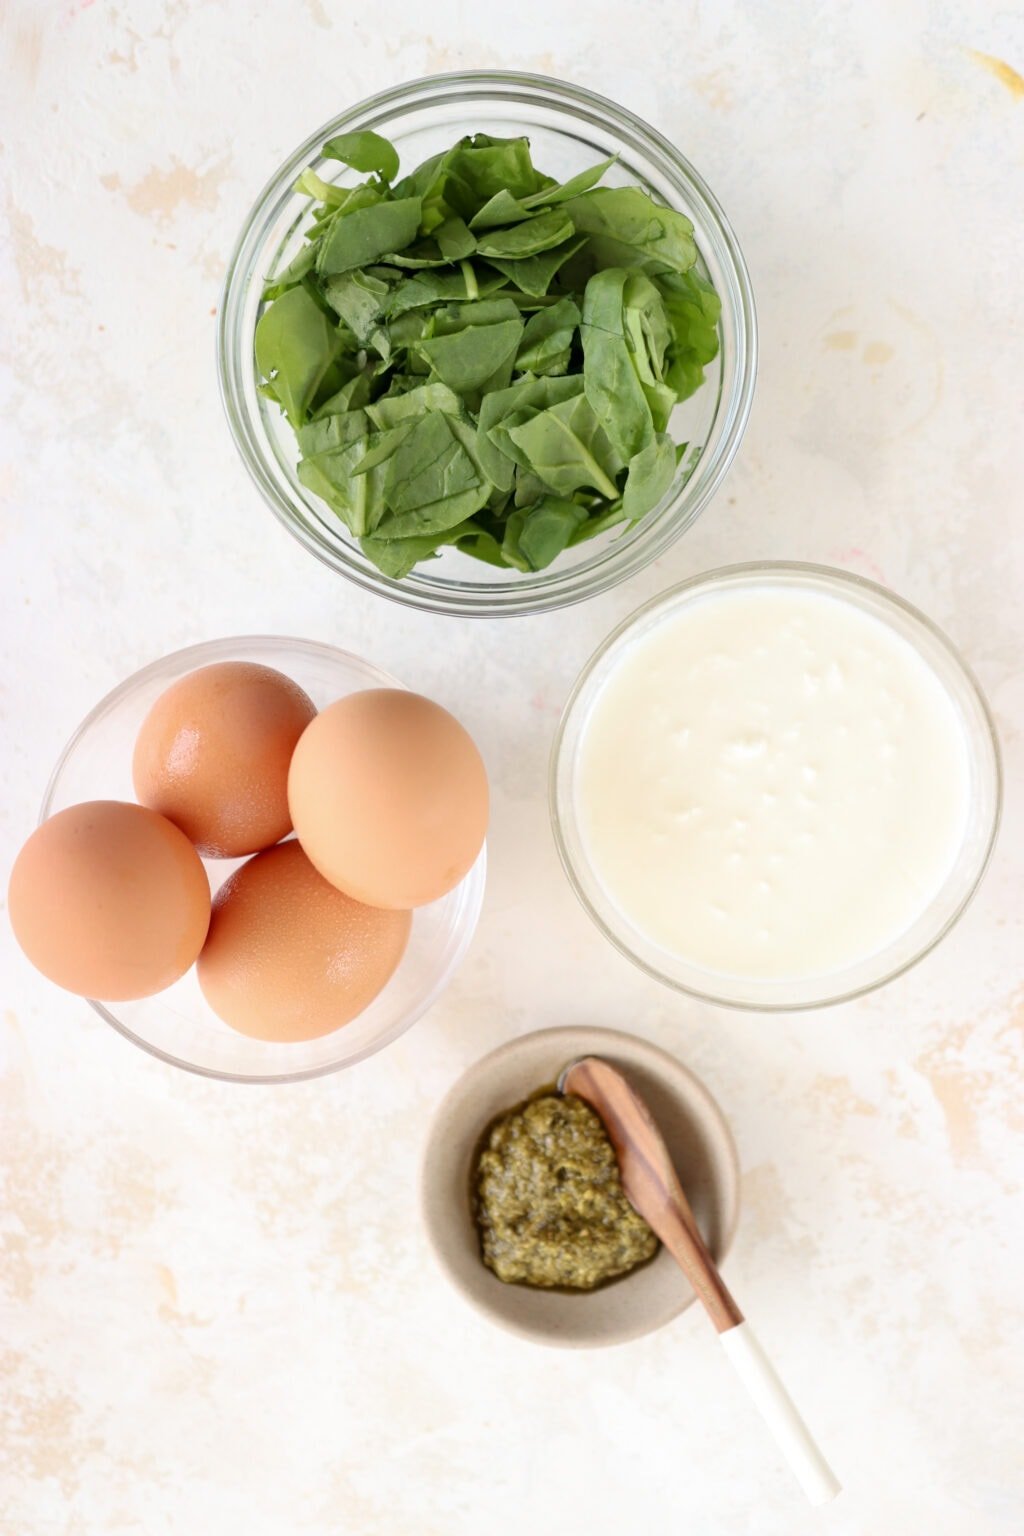 The ingredients to make this recipe are laid out in bowls including spinach, cottage cheese, eggs, and pesto. 